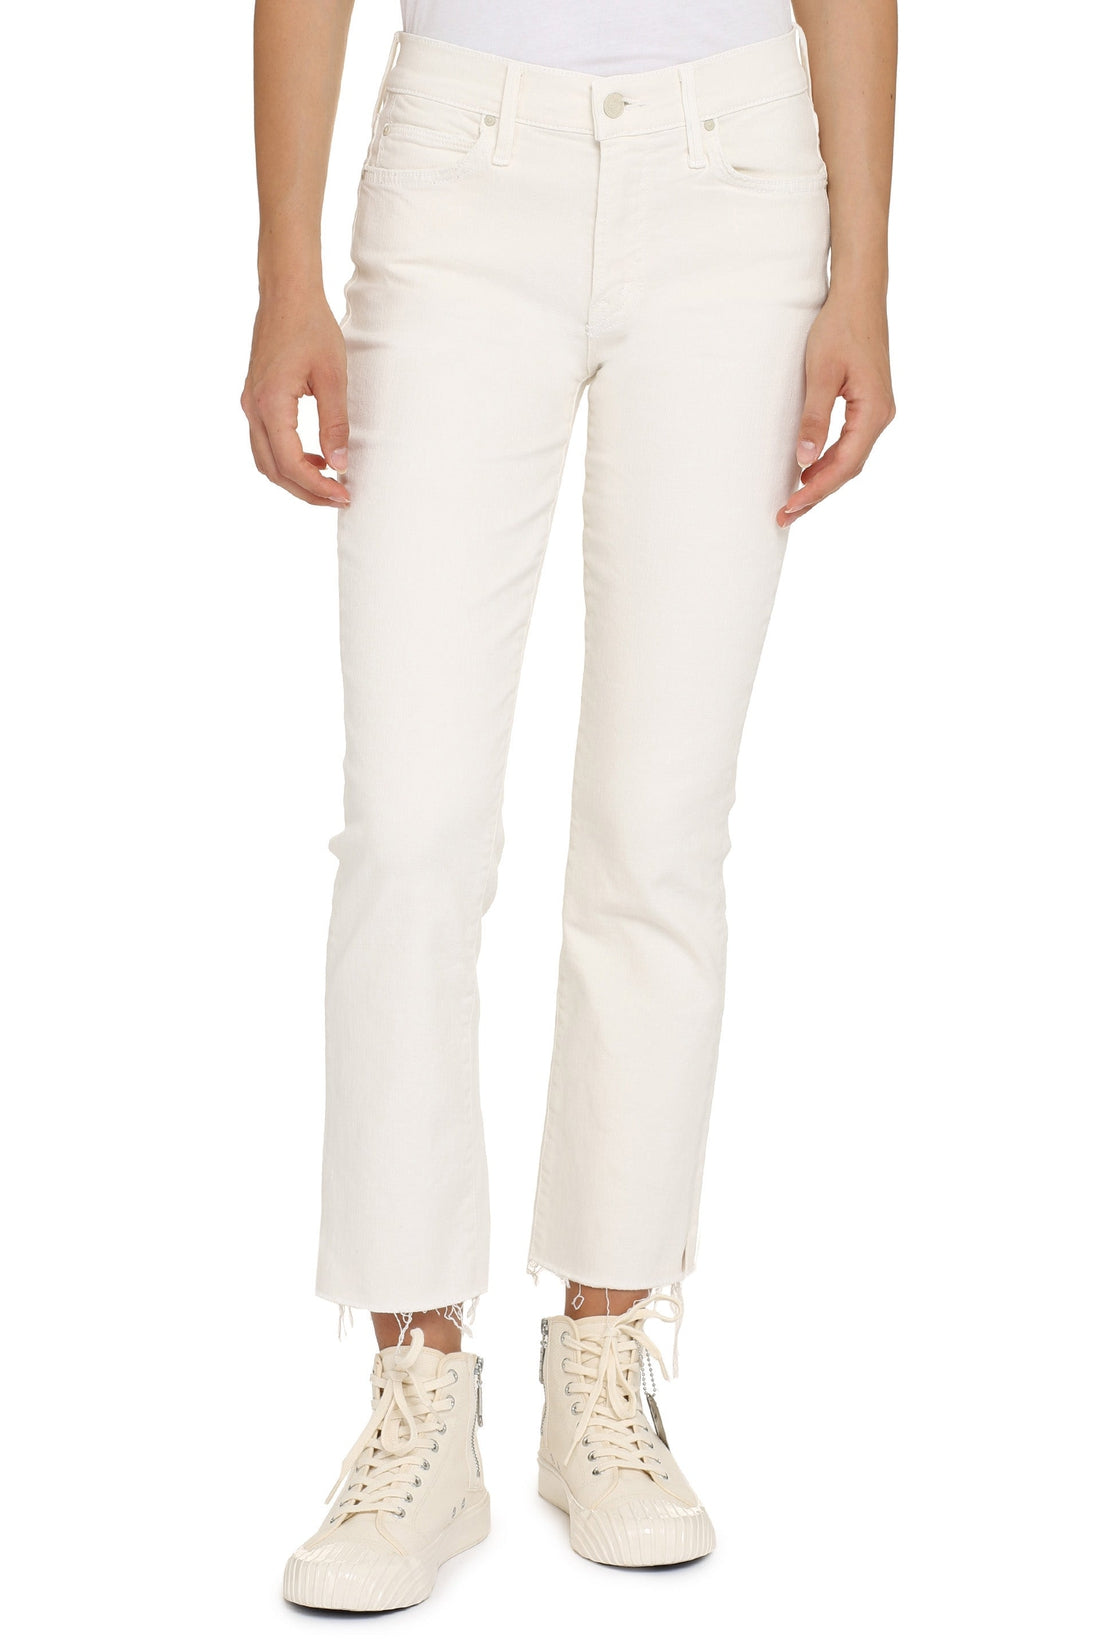 Mother-OUTLET-SALE-The Rascal Ankle skinny jeans-ARCHIVIST